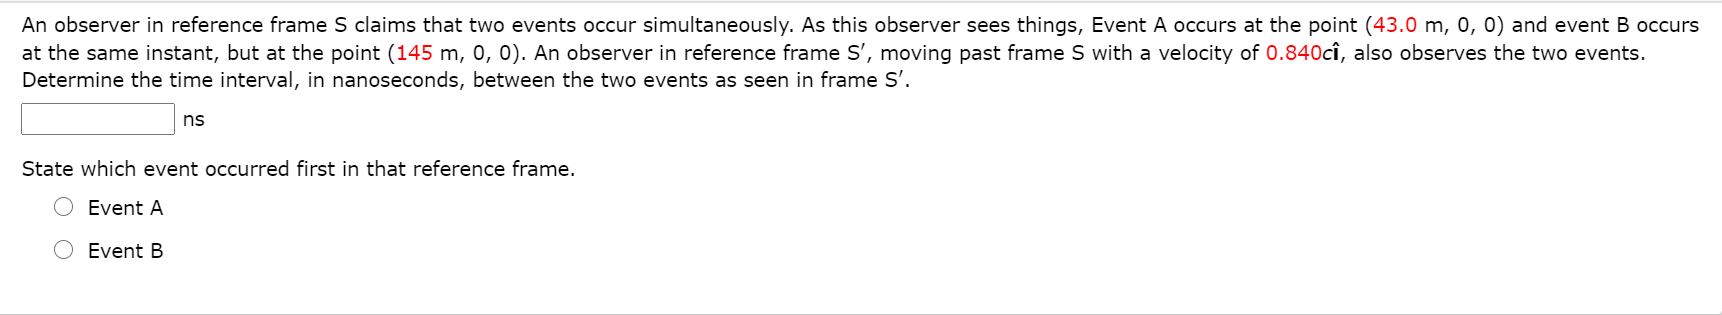 An observer in reference frame S claims that two events occur simultaneously. As this observer sees things, Event A occurs at the point (43.0 m, 0, 0) and event B occurs
at the same instant, but at the point (145 m, 0, 0). An observer in reference frame S', moving past frame S with a velocity of 0.840cî, also observes the two events.
Determine the time interval, in nanoseconds, between the two events as seen in frame S'.
ns
State which event occurred first in that reference frame.
Event A
Event B
